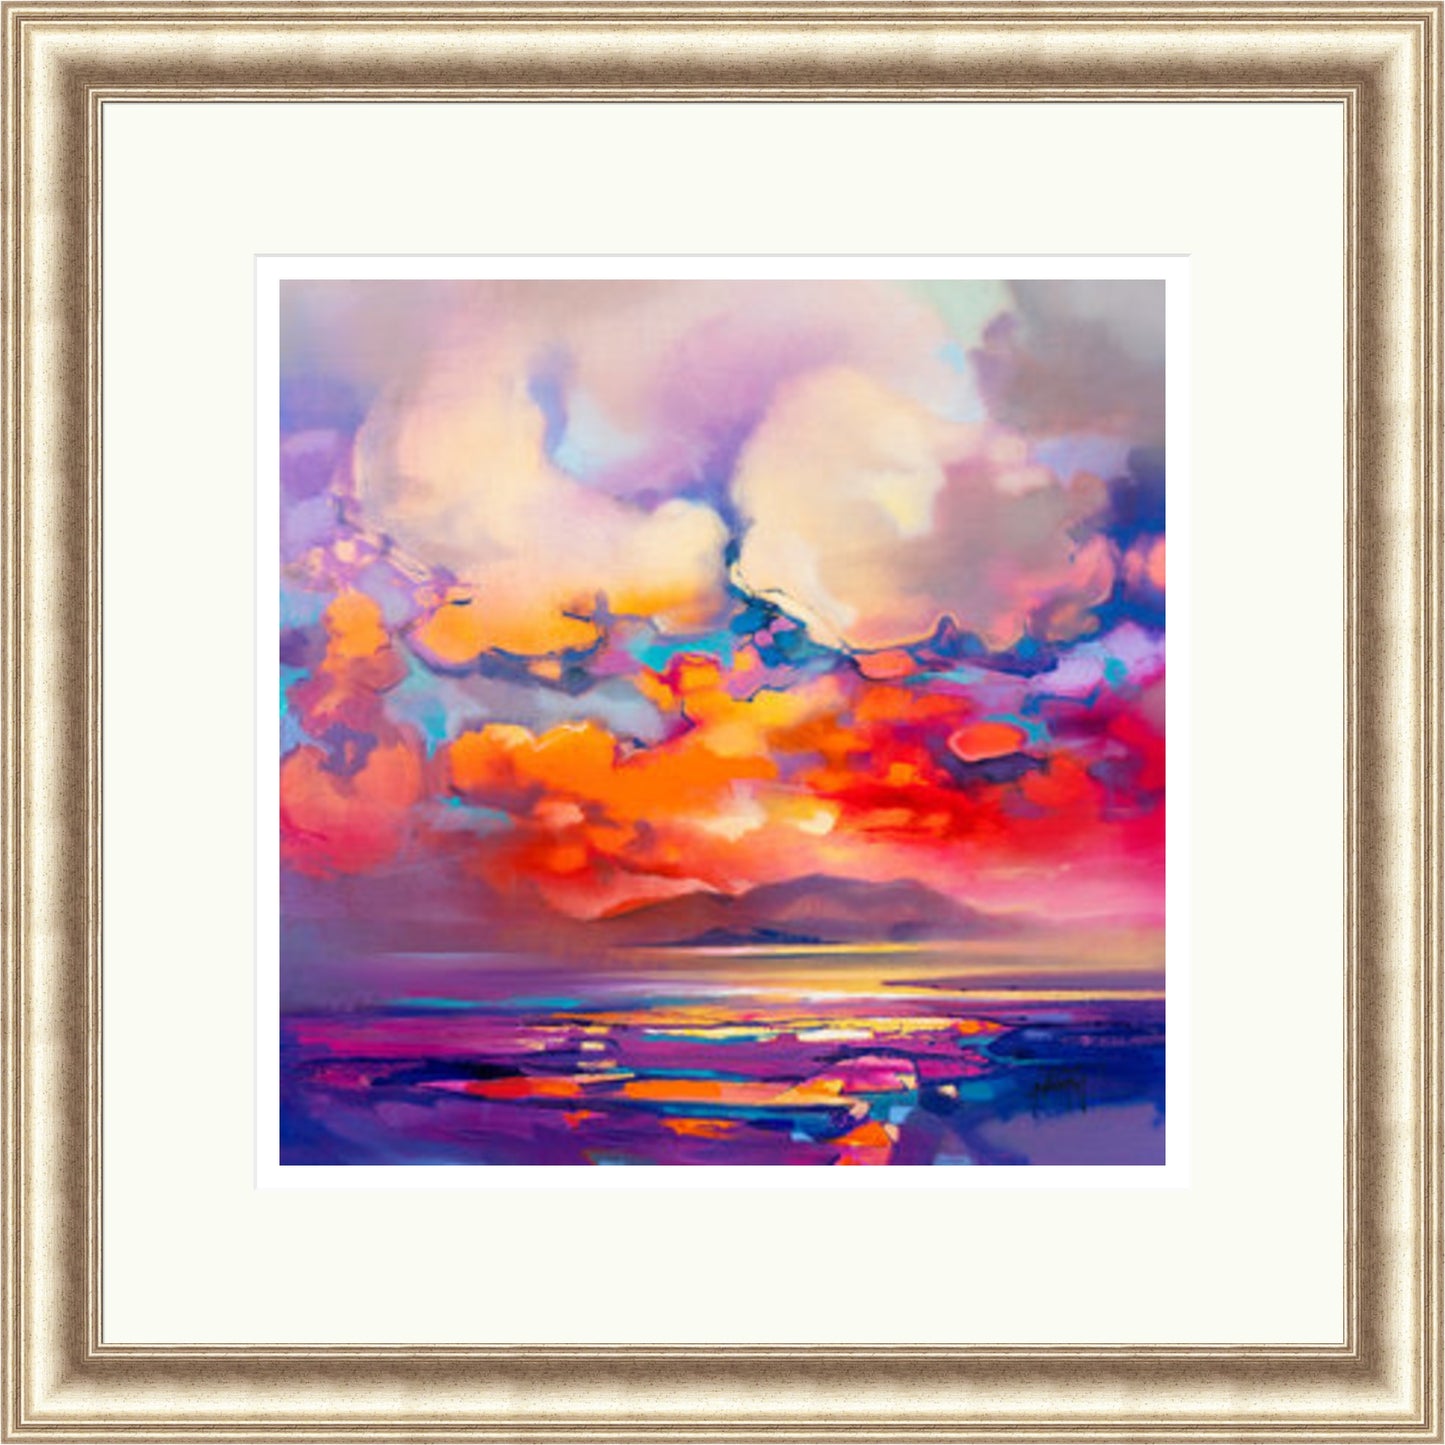 Mull Emerges (Limited Edition) by Scott Naismith